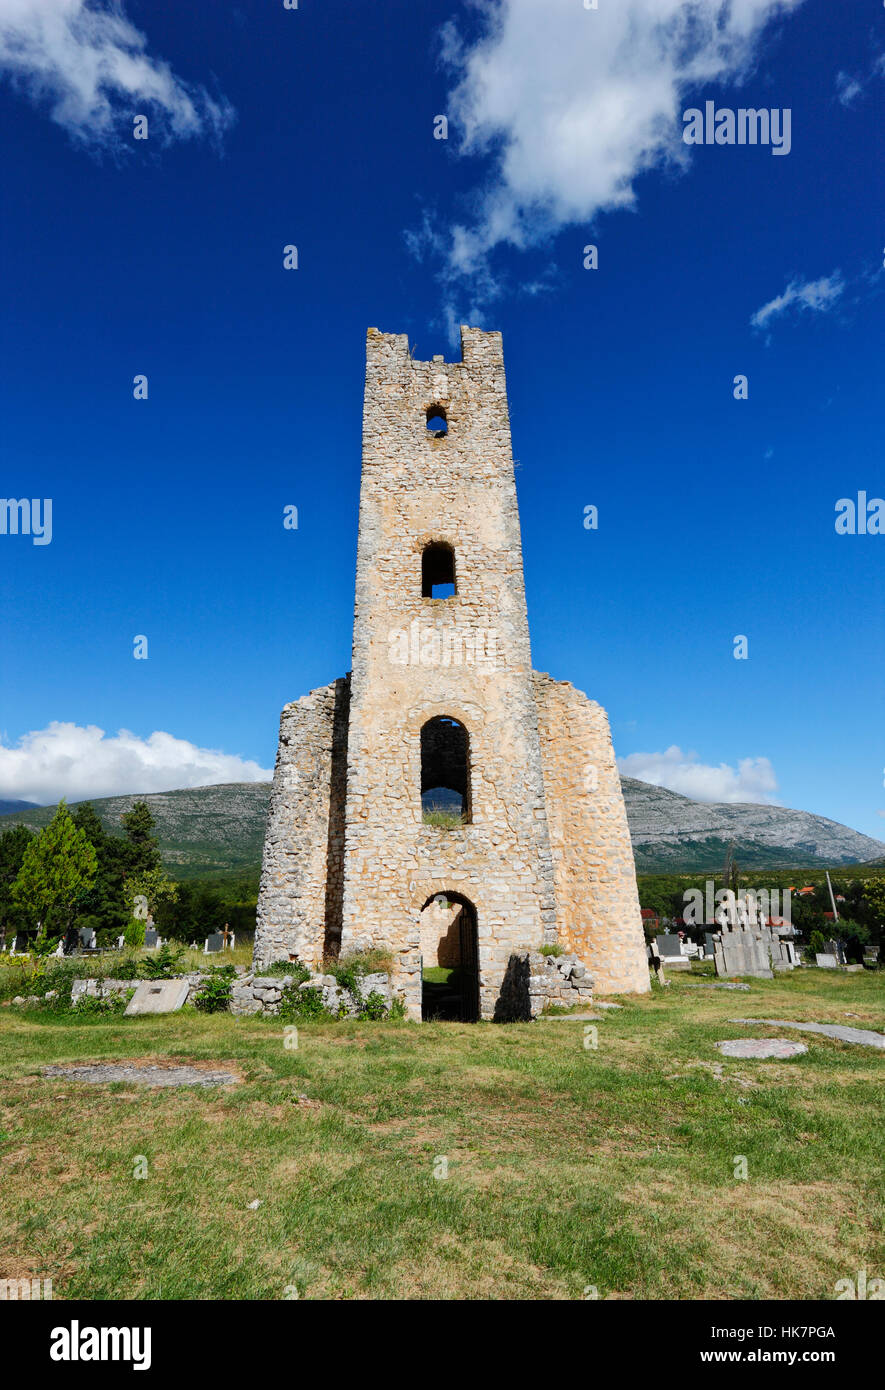 The Church of the Holy Salvation.The oldest church in Croatia (Crkva Sv. Spasa), Pre-Romanesque church in Dalmatia, near source of river Cetina. Stock Photo